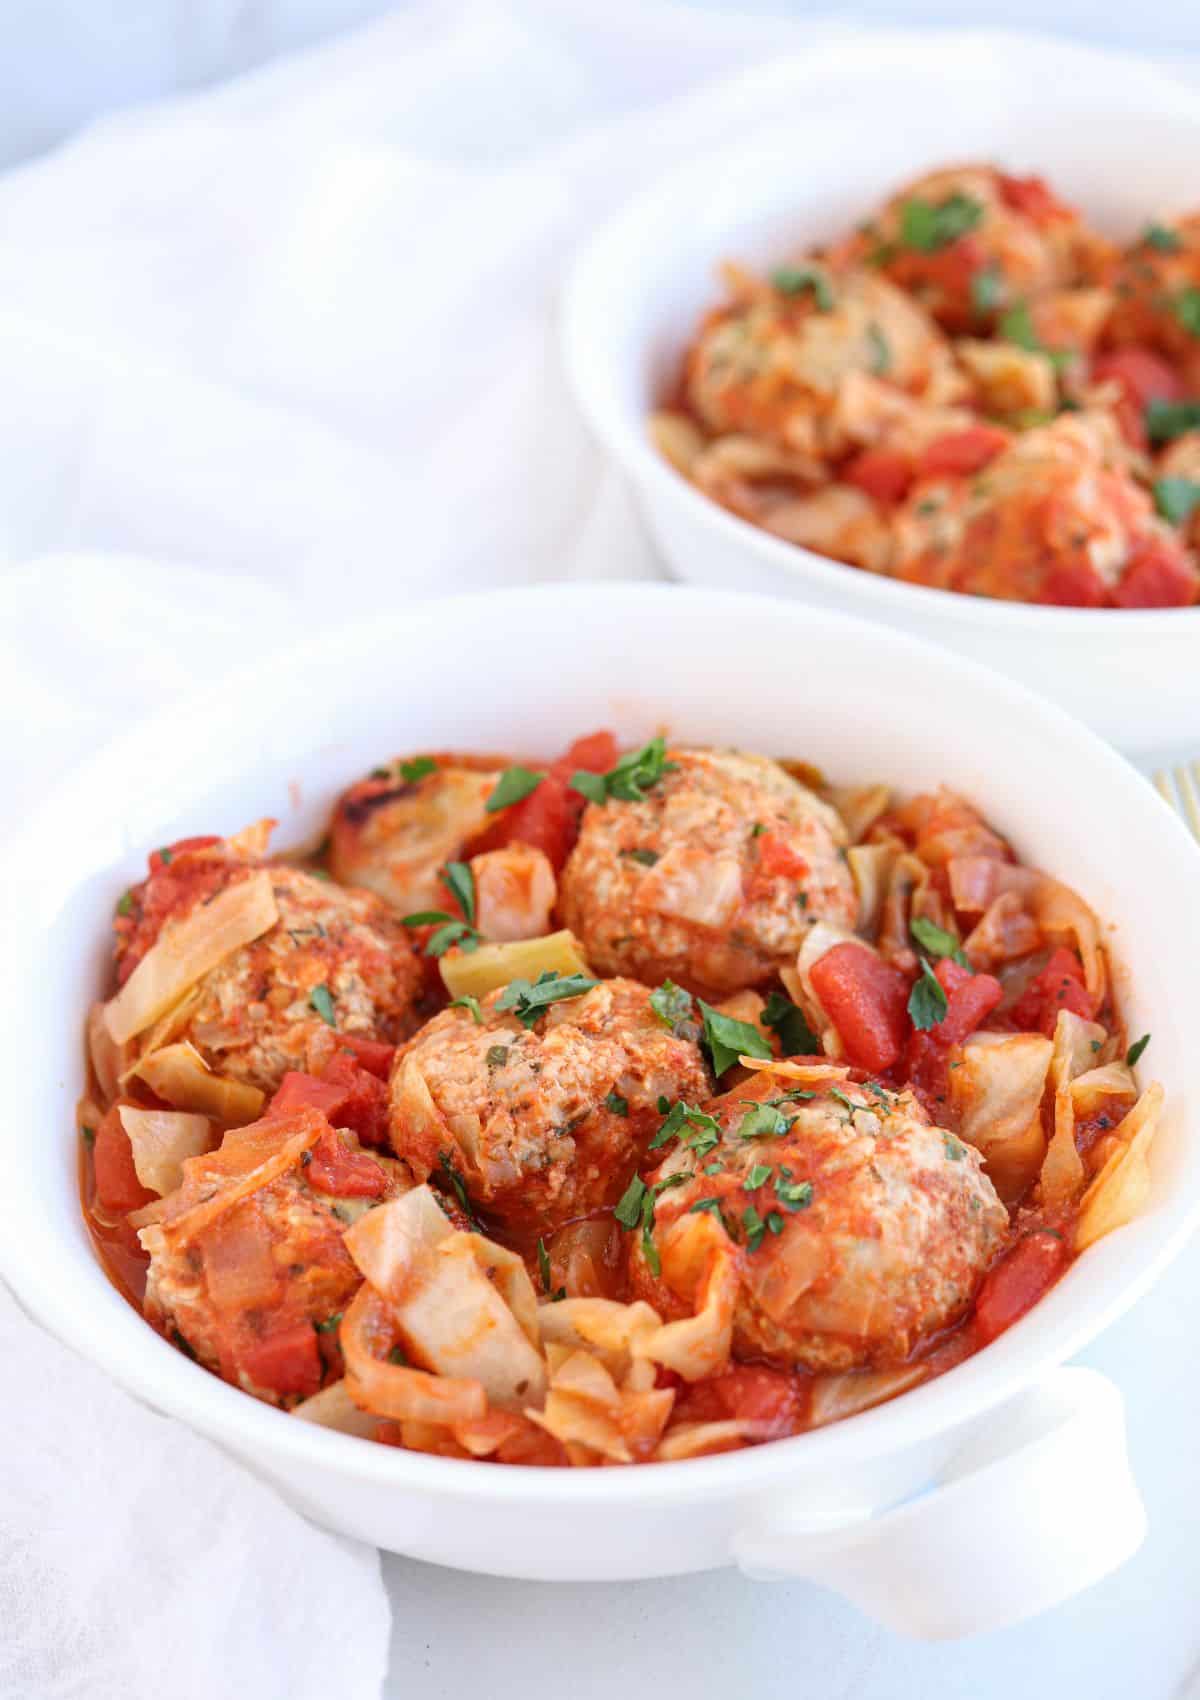 cabbage and meatballs in white bowls.